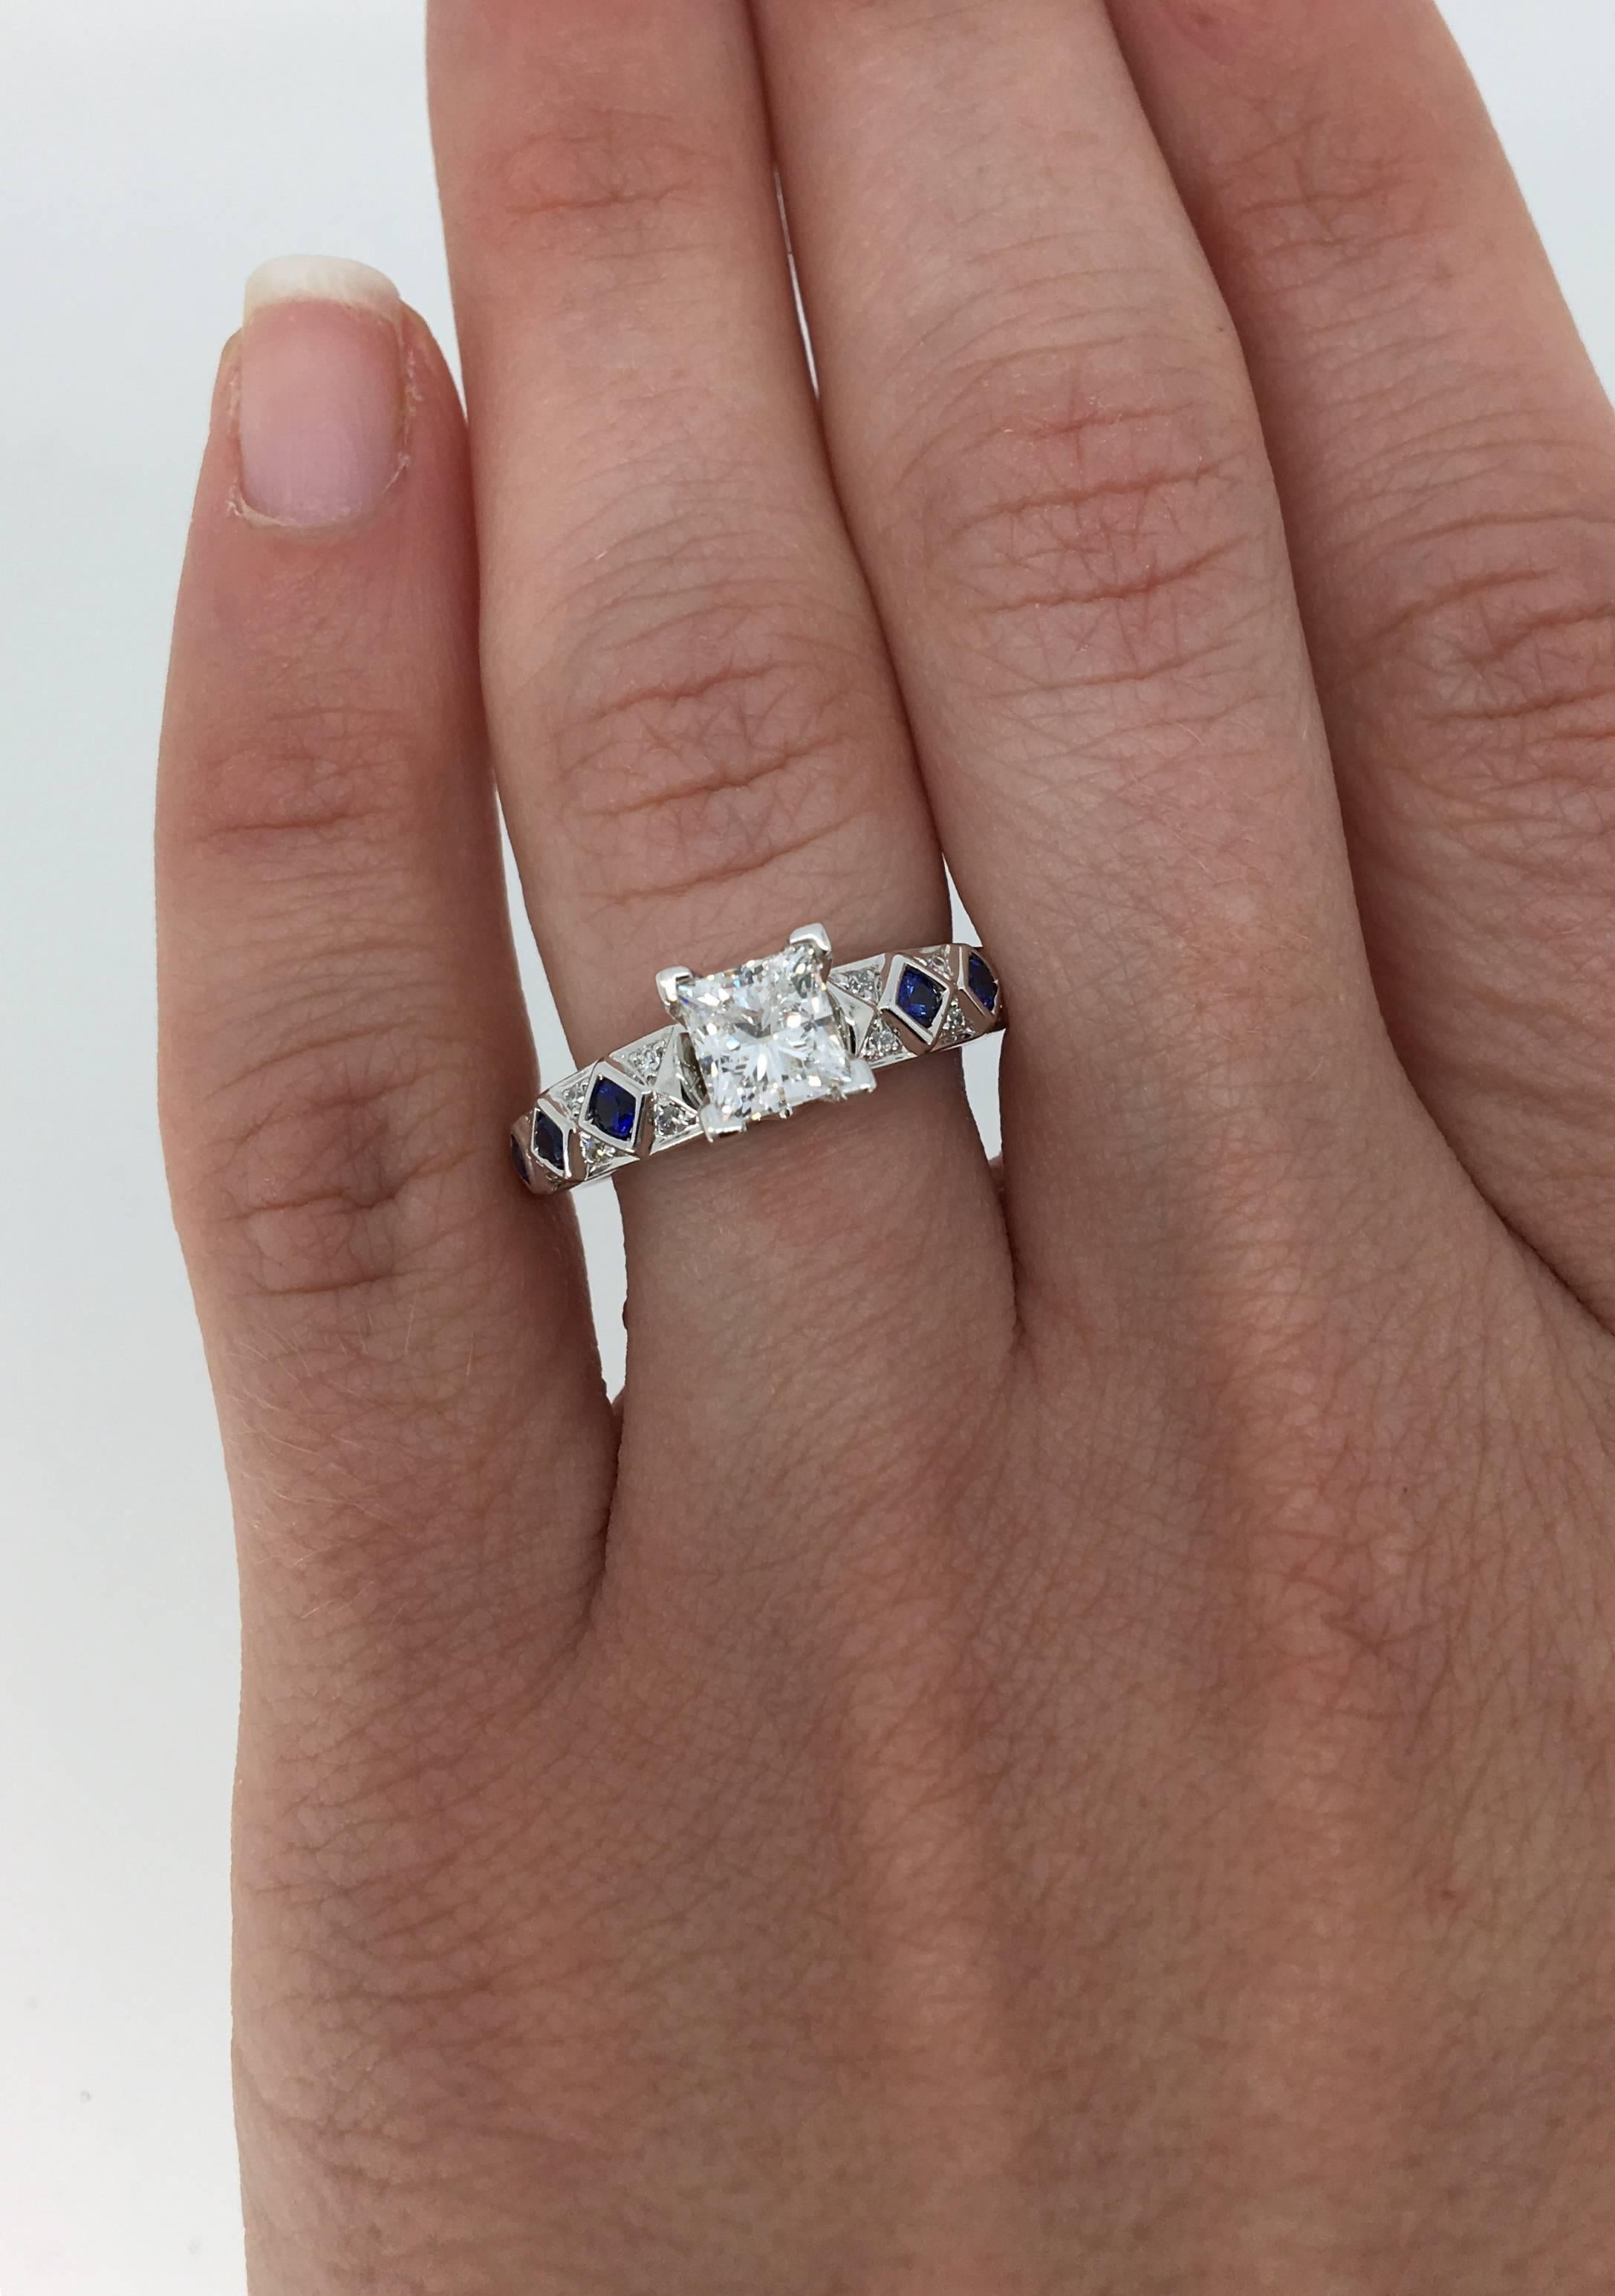 Engagement Ring from Renditions line of designer Harout R. The ring features an IGI certified 1.06CT princess cut diamond with G color, SI2 clarity. It is accented by 26 Round Brilliant Cut Diamonds and 6 blue sapphires. The total diamond weight is